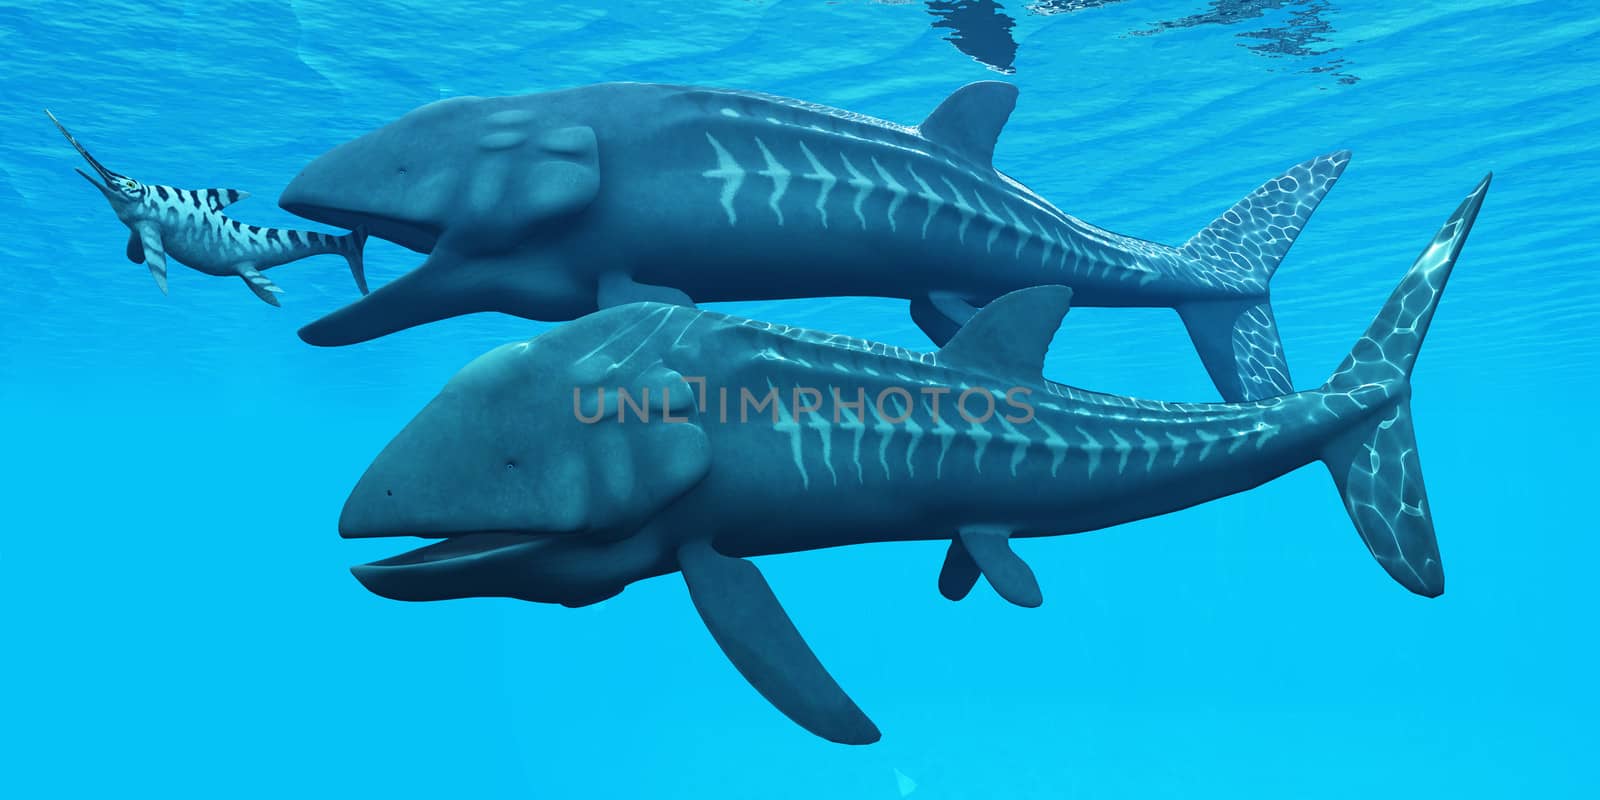 Leedsichthys was a giant extinct fish from the Jurassic Seas. Here one is about to swallow an Ichthyosaurus marine reptile.